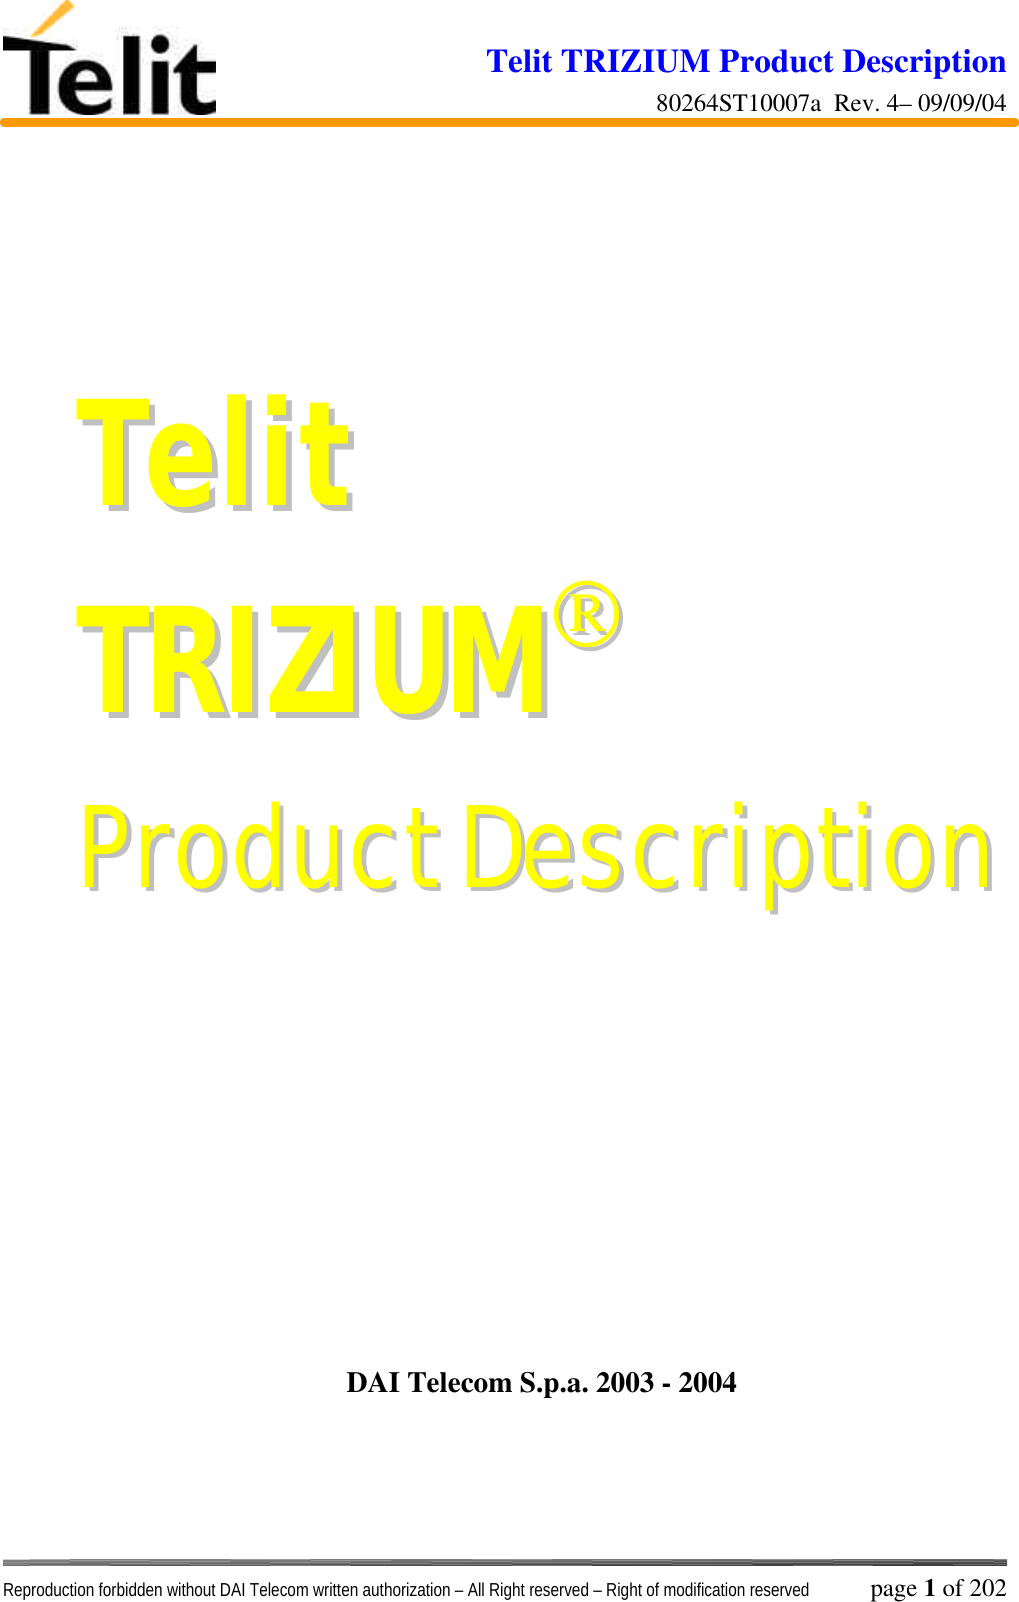 Telit TRIZIUM Product Description80264ST10007a  Rev. 4– 09/09/04Reproduction forbidden without DAI Telecom written authorization – All Right reserved – Right of modification reserved page 1 of 202TTeelliittTTRRIIZZIIUUMMPPrroodduucctt  DDeessccrriippttiioonnDAI Telecom S.p.a. 2003 - 2004